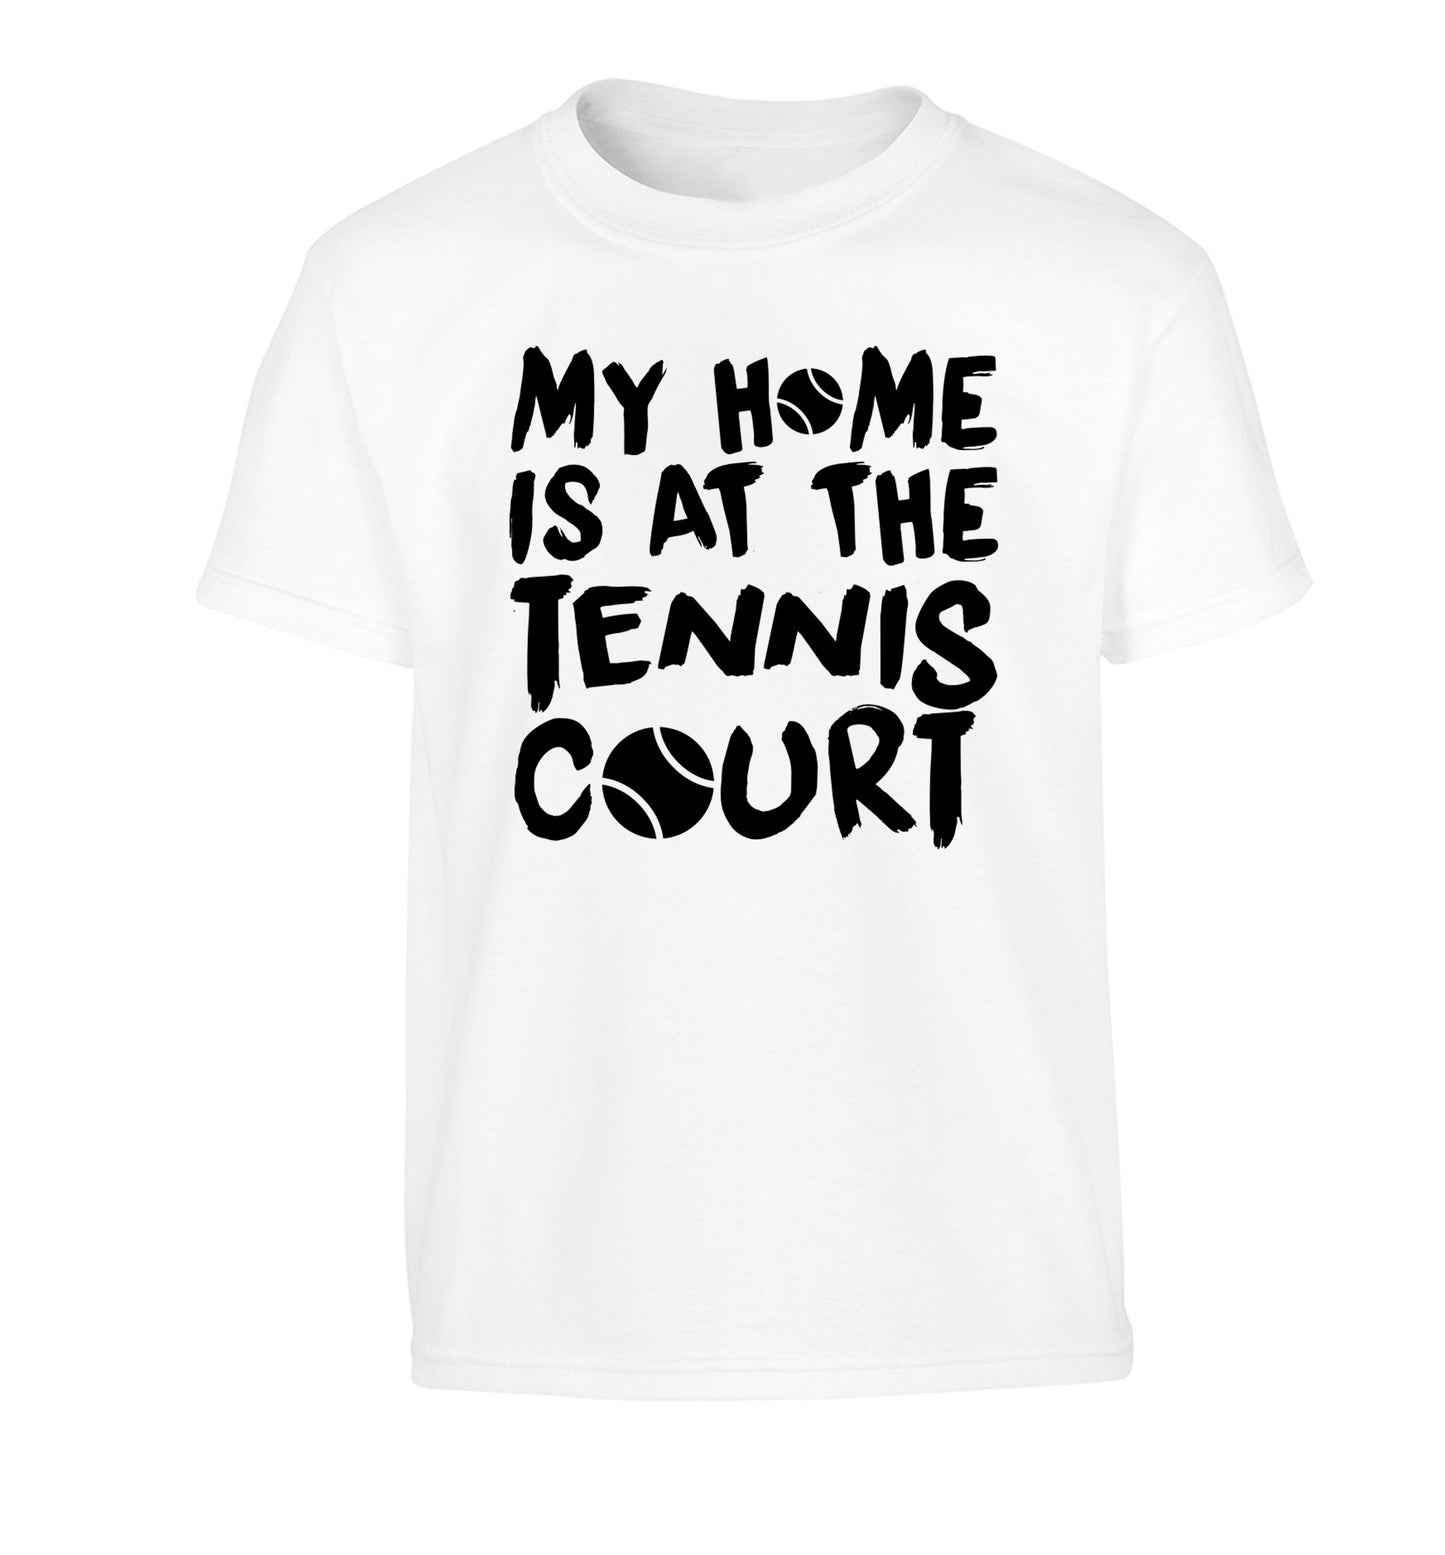 My home is at the tennis court Children's white Tshirt 12-14 Years